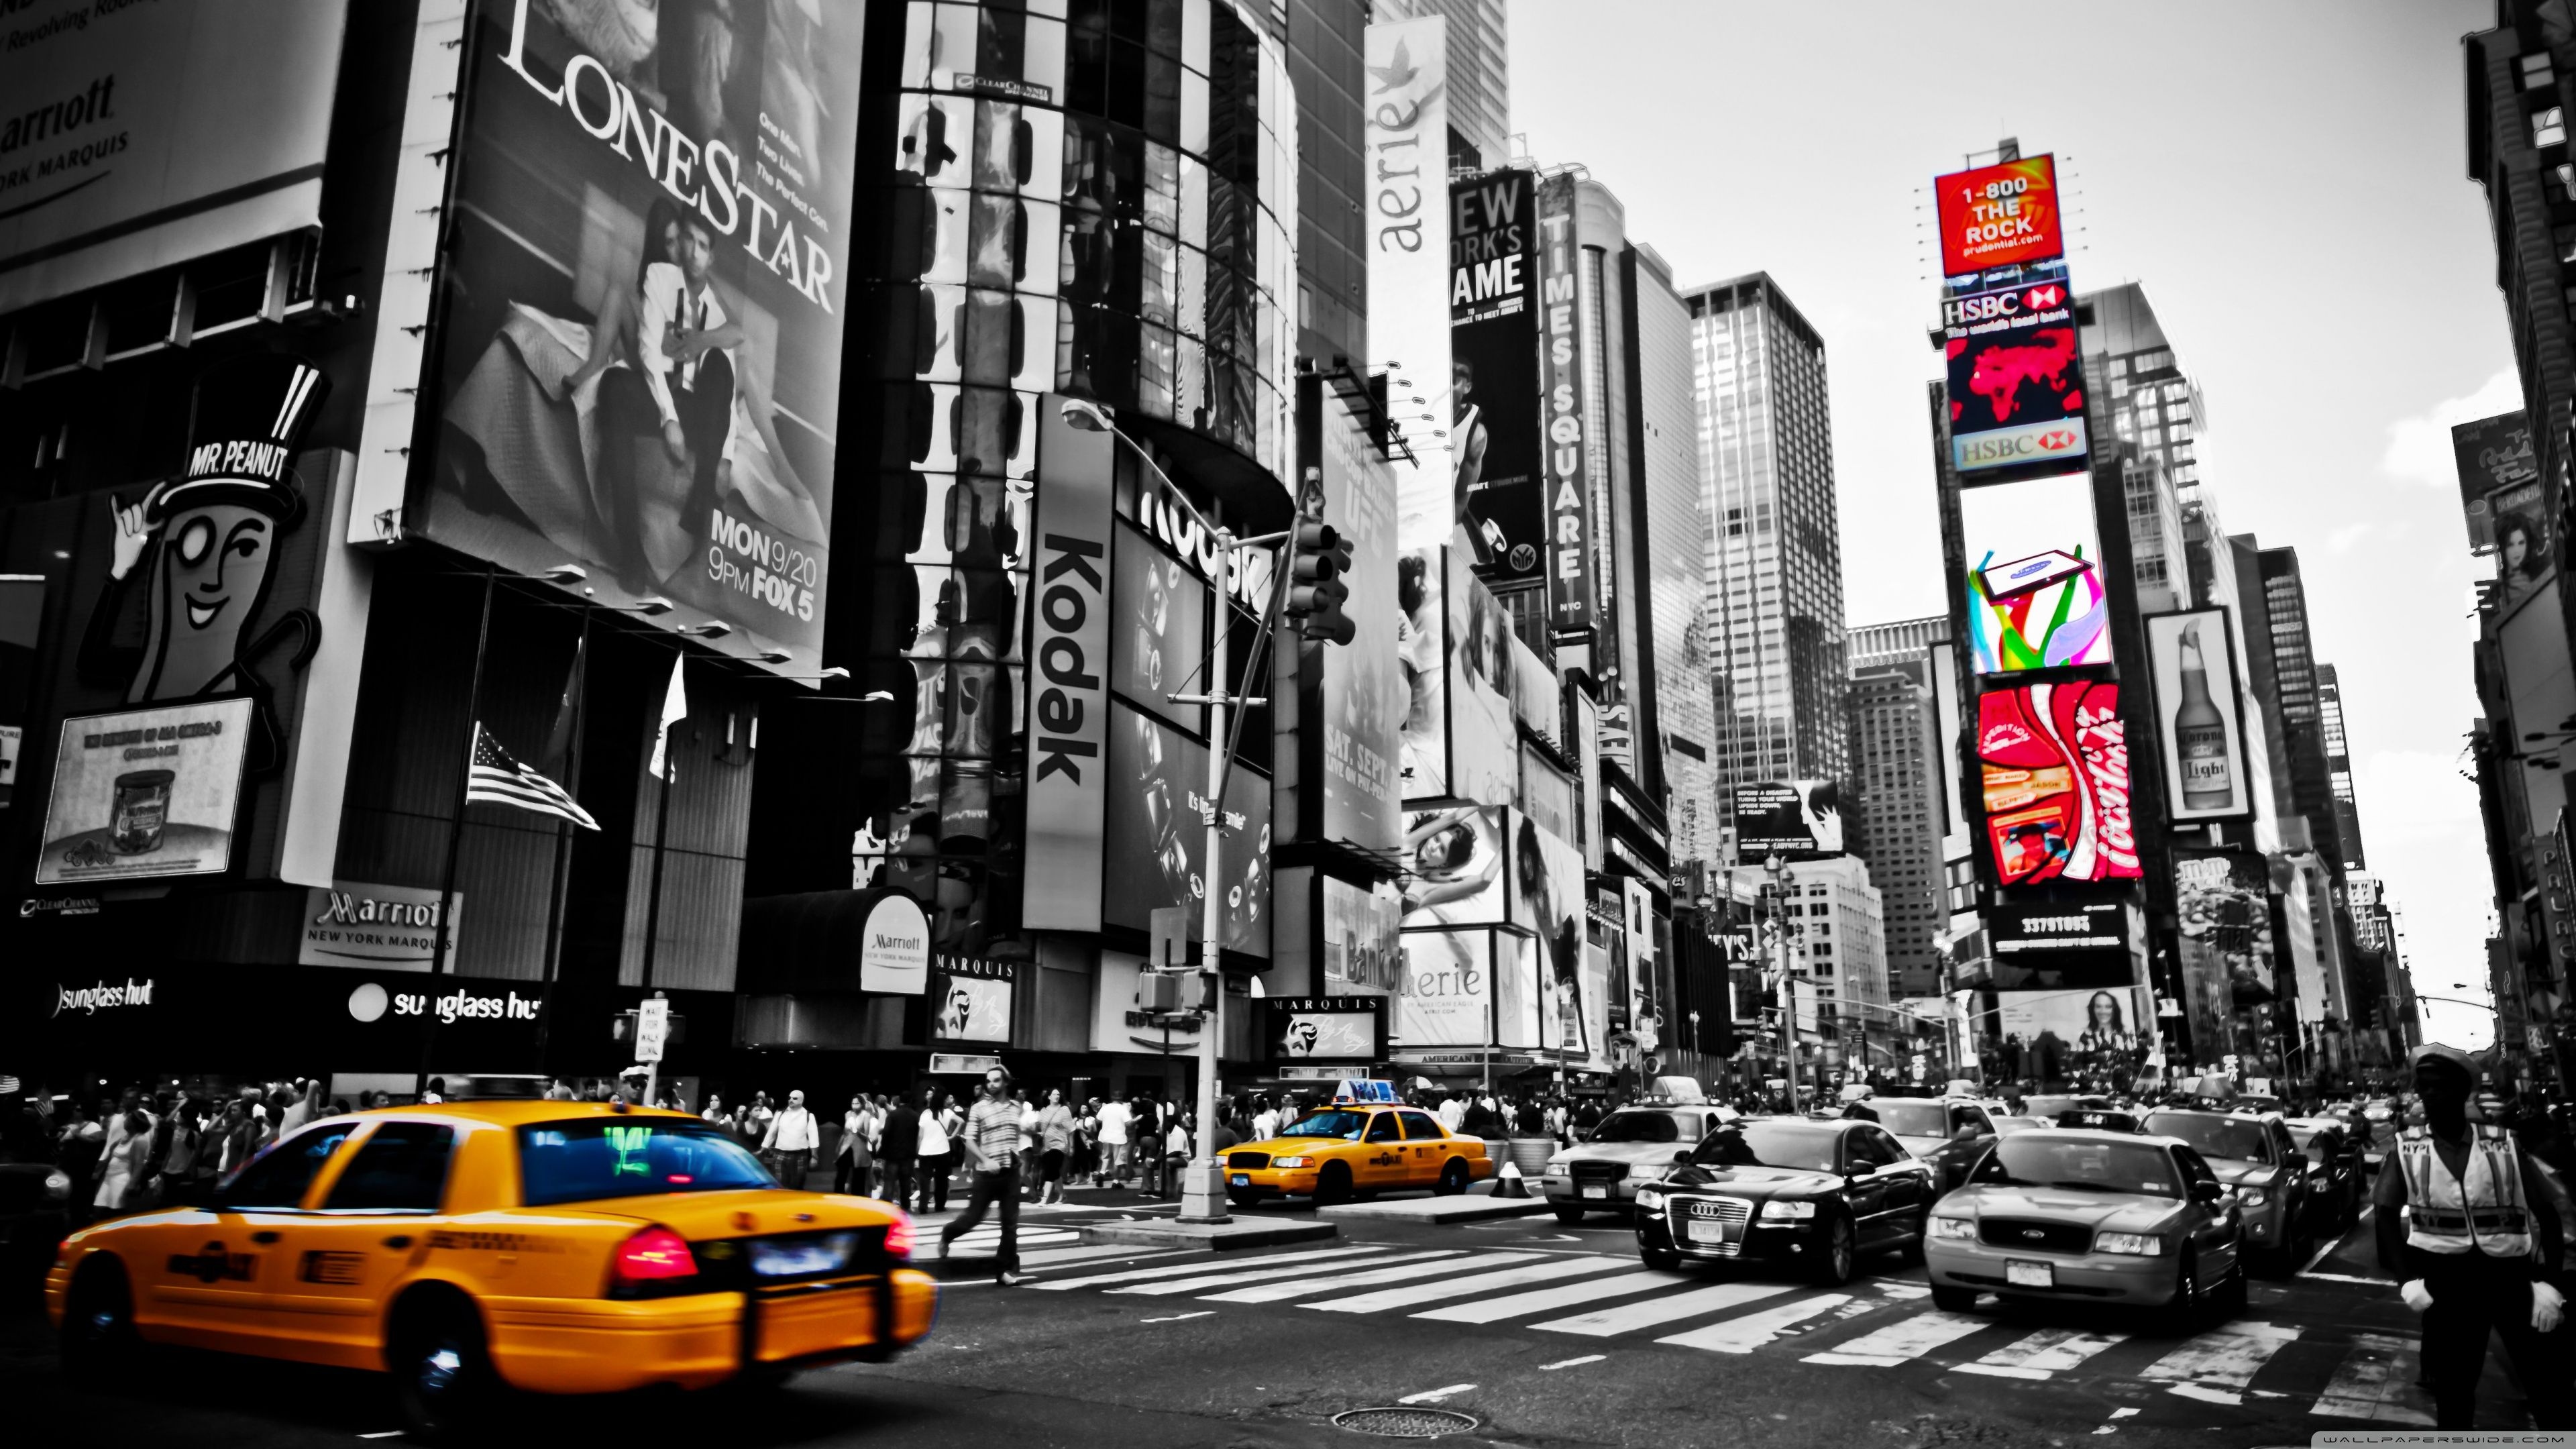 Times Square HD wallpapers, Top free Times Square HD backgrounds, 3840x2160 4K Desktop